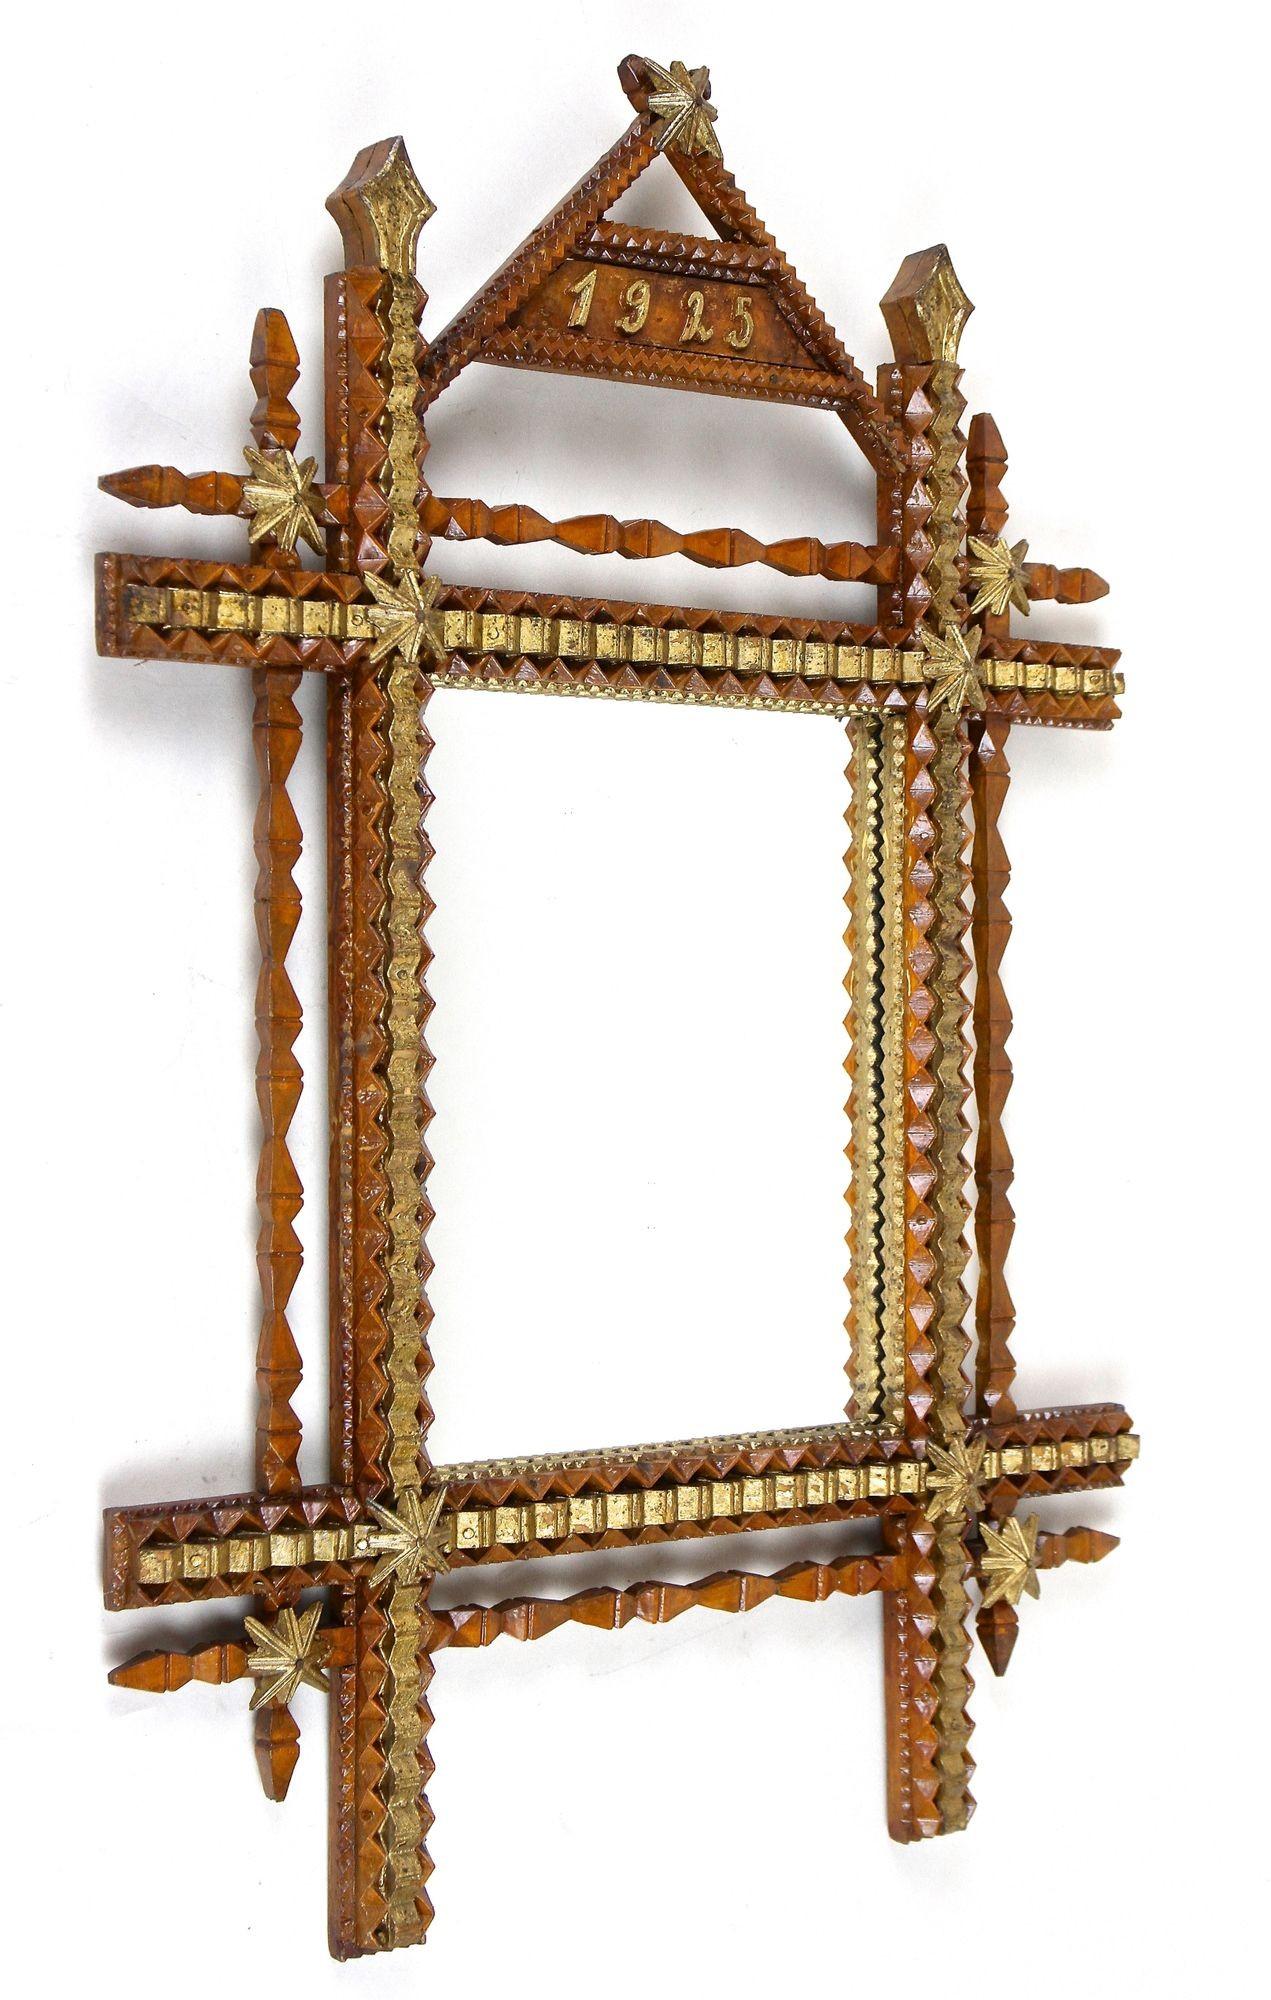 Marvelous looking rustic Tramp Art wall mirror from the early 20th century in Austria. Dated to 1925, this unusual, very detailed 